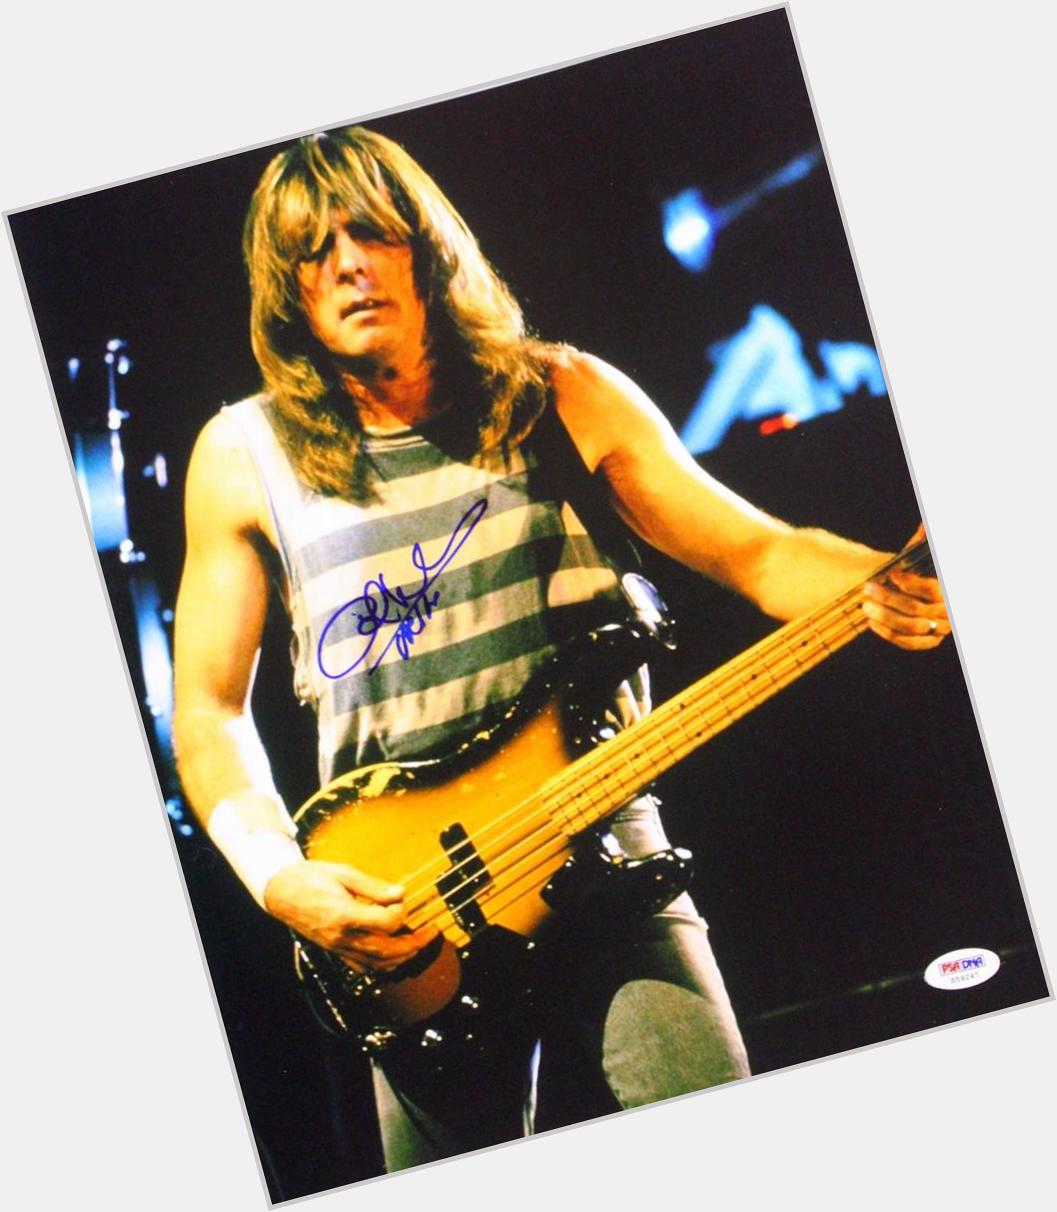 Morning! And yesterday was his birthday.
HAPPY BIRTHDAY to Cliff Williams!!! 